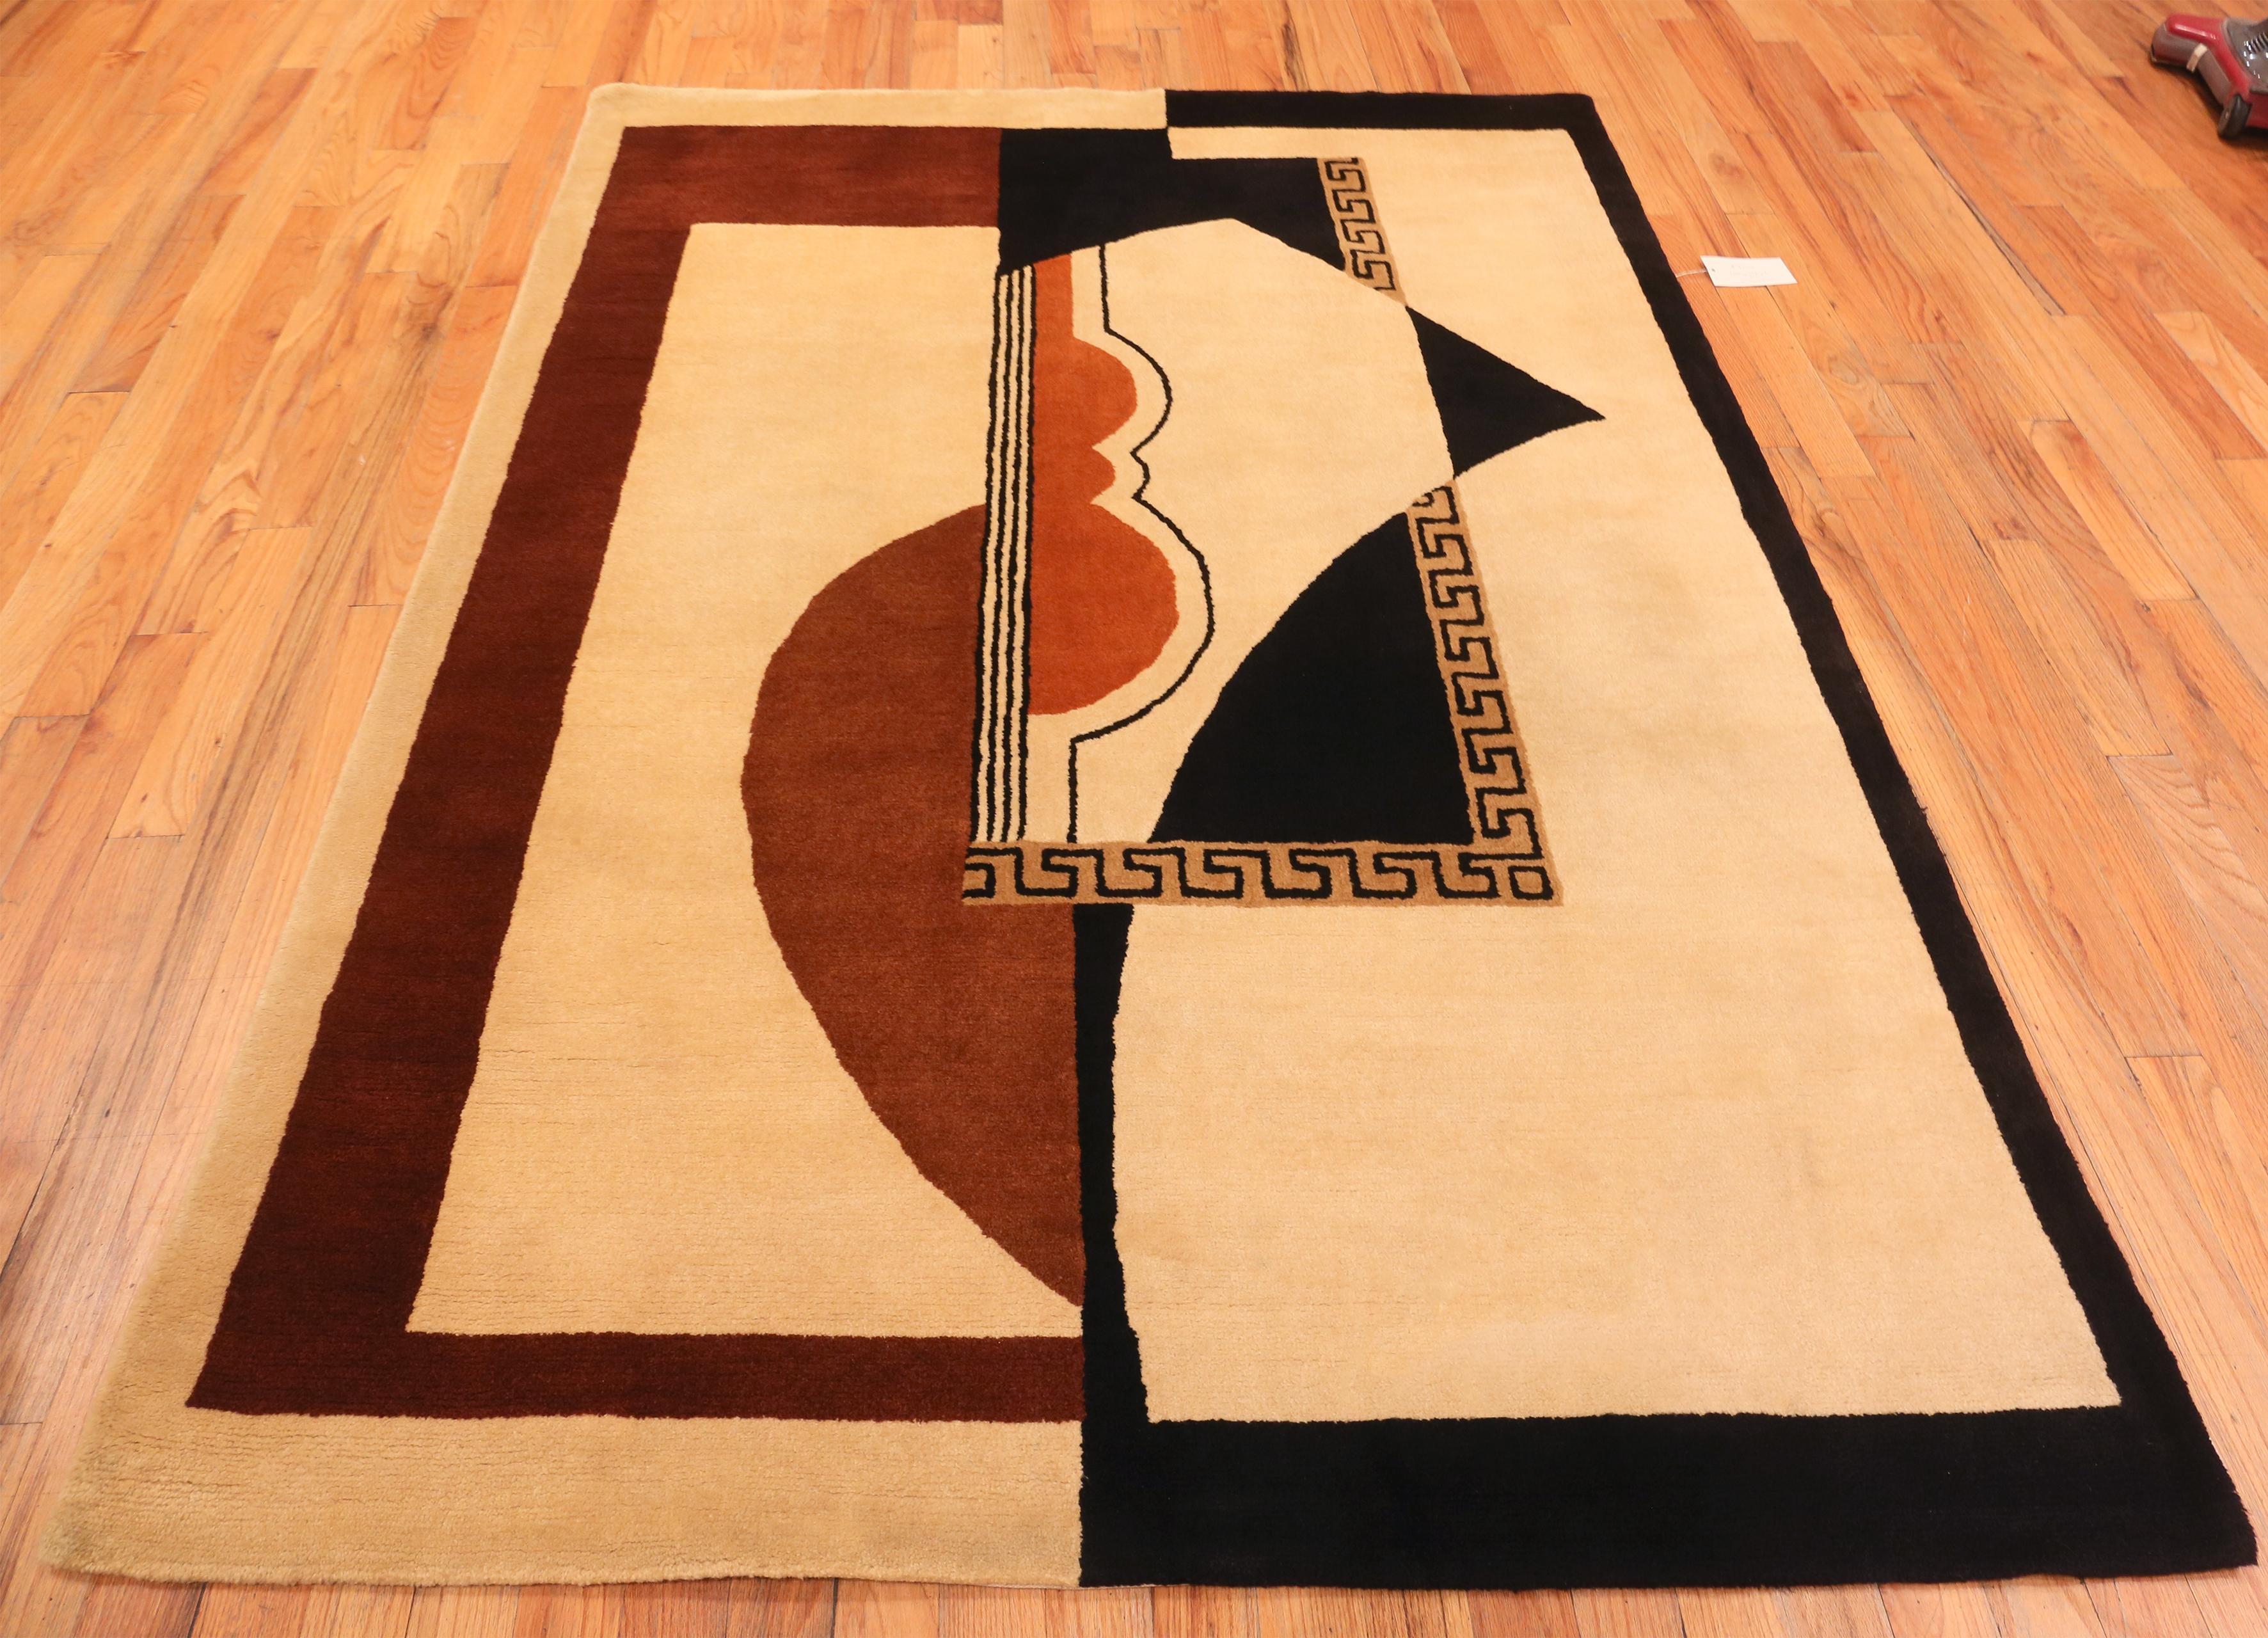 Beautiful Vintage French Art Deco Area Tufted Rug, country of origin / rug type: French rugs, Circa Date: Mid 20th Century. Size: 5 ft 8 in x 7 ft 10 in (1.72 m x 2.38 m). 

